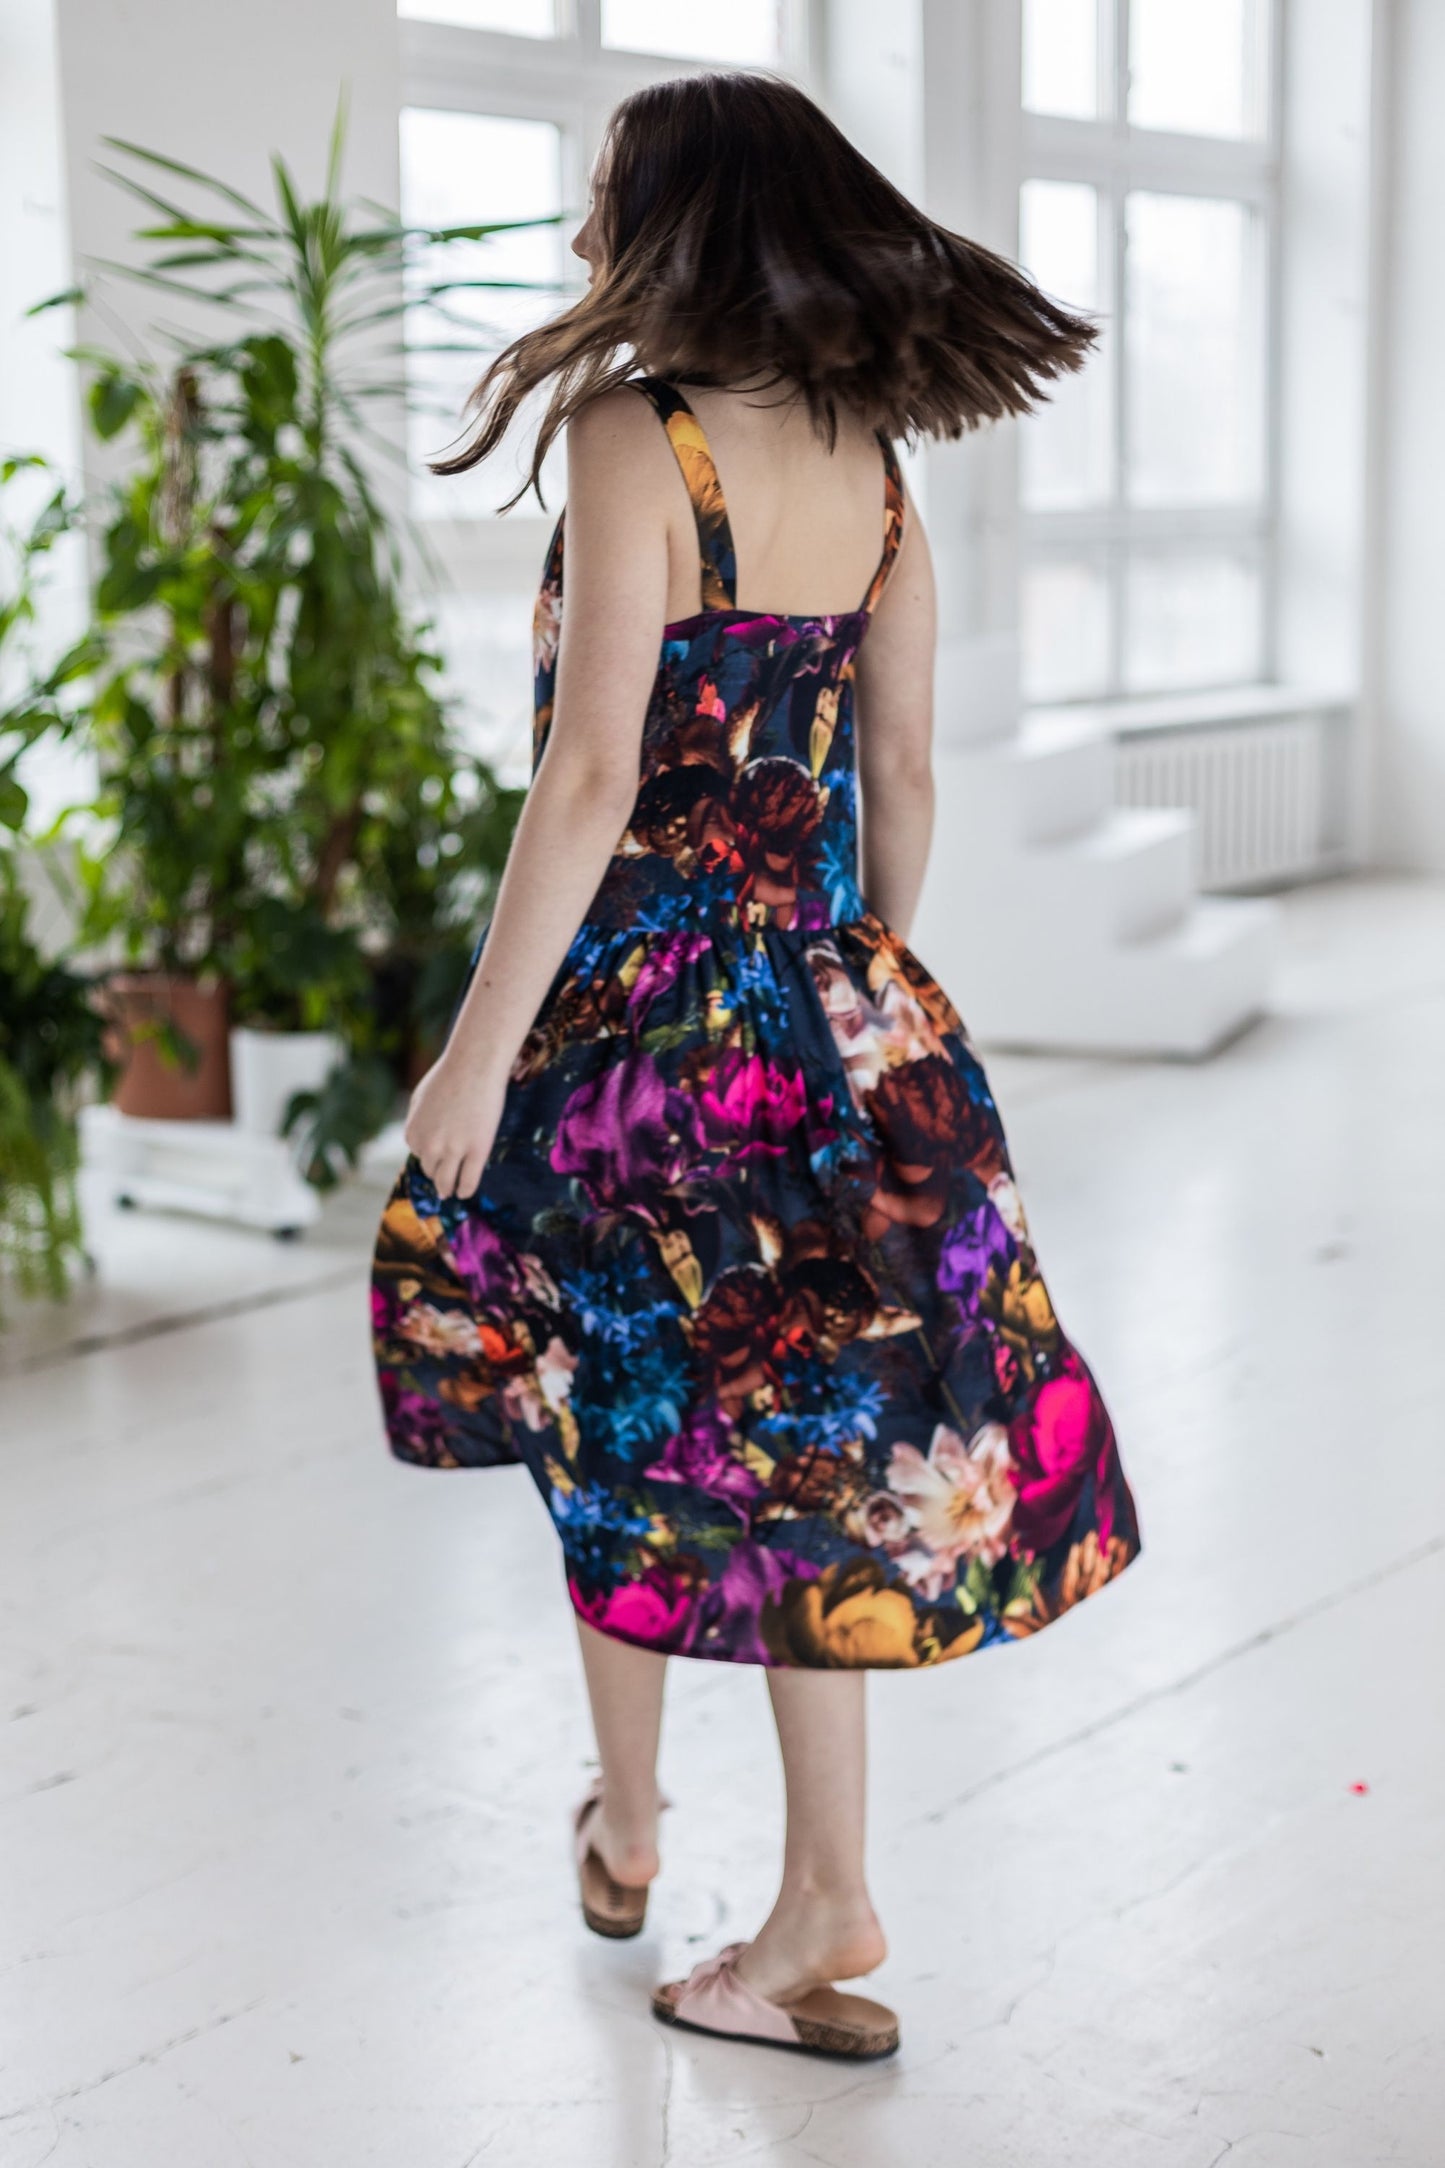 Floral midi length summer dress with ruffles